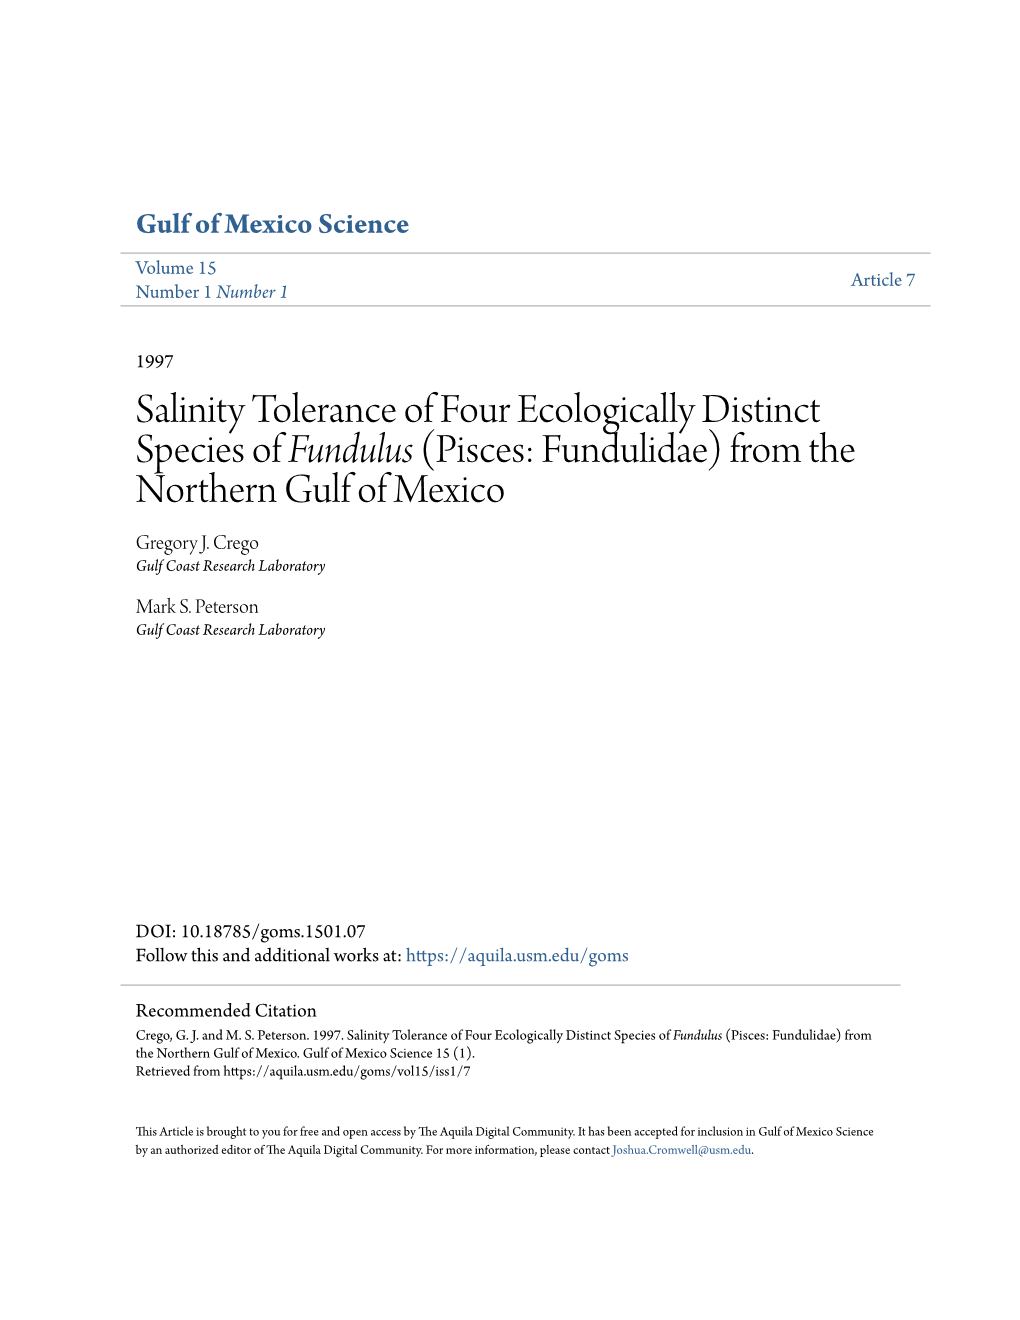 Salinity Tolerance of Four Ecologically Distinct Species of Fundulus (Pisces: Fundulidae) from the Northern Gulf of Mexico Gregory J